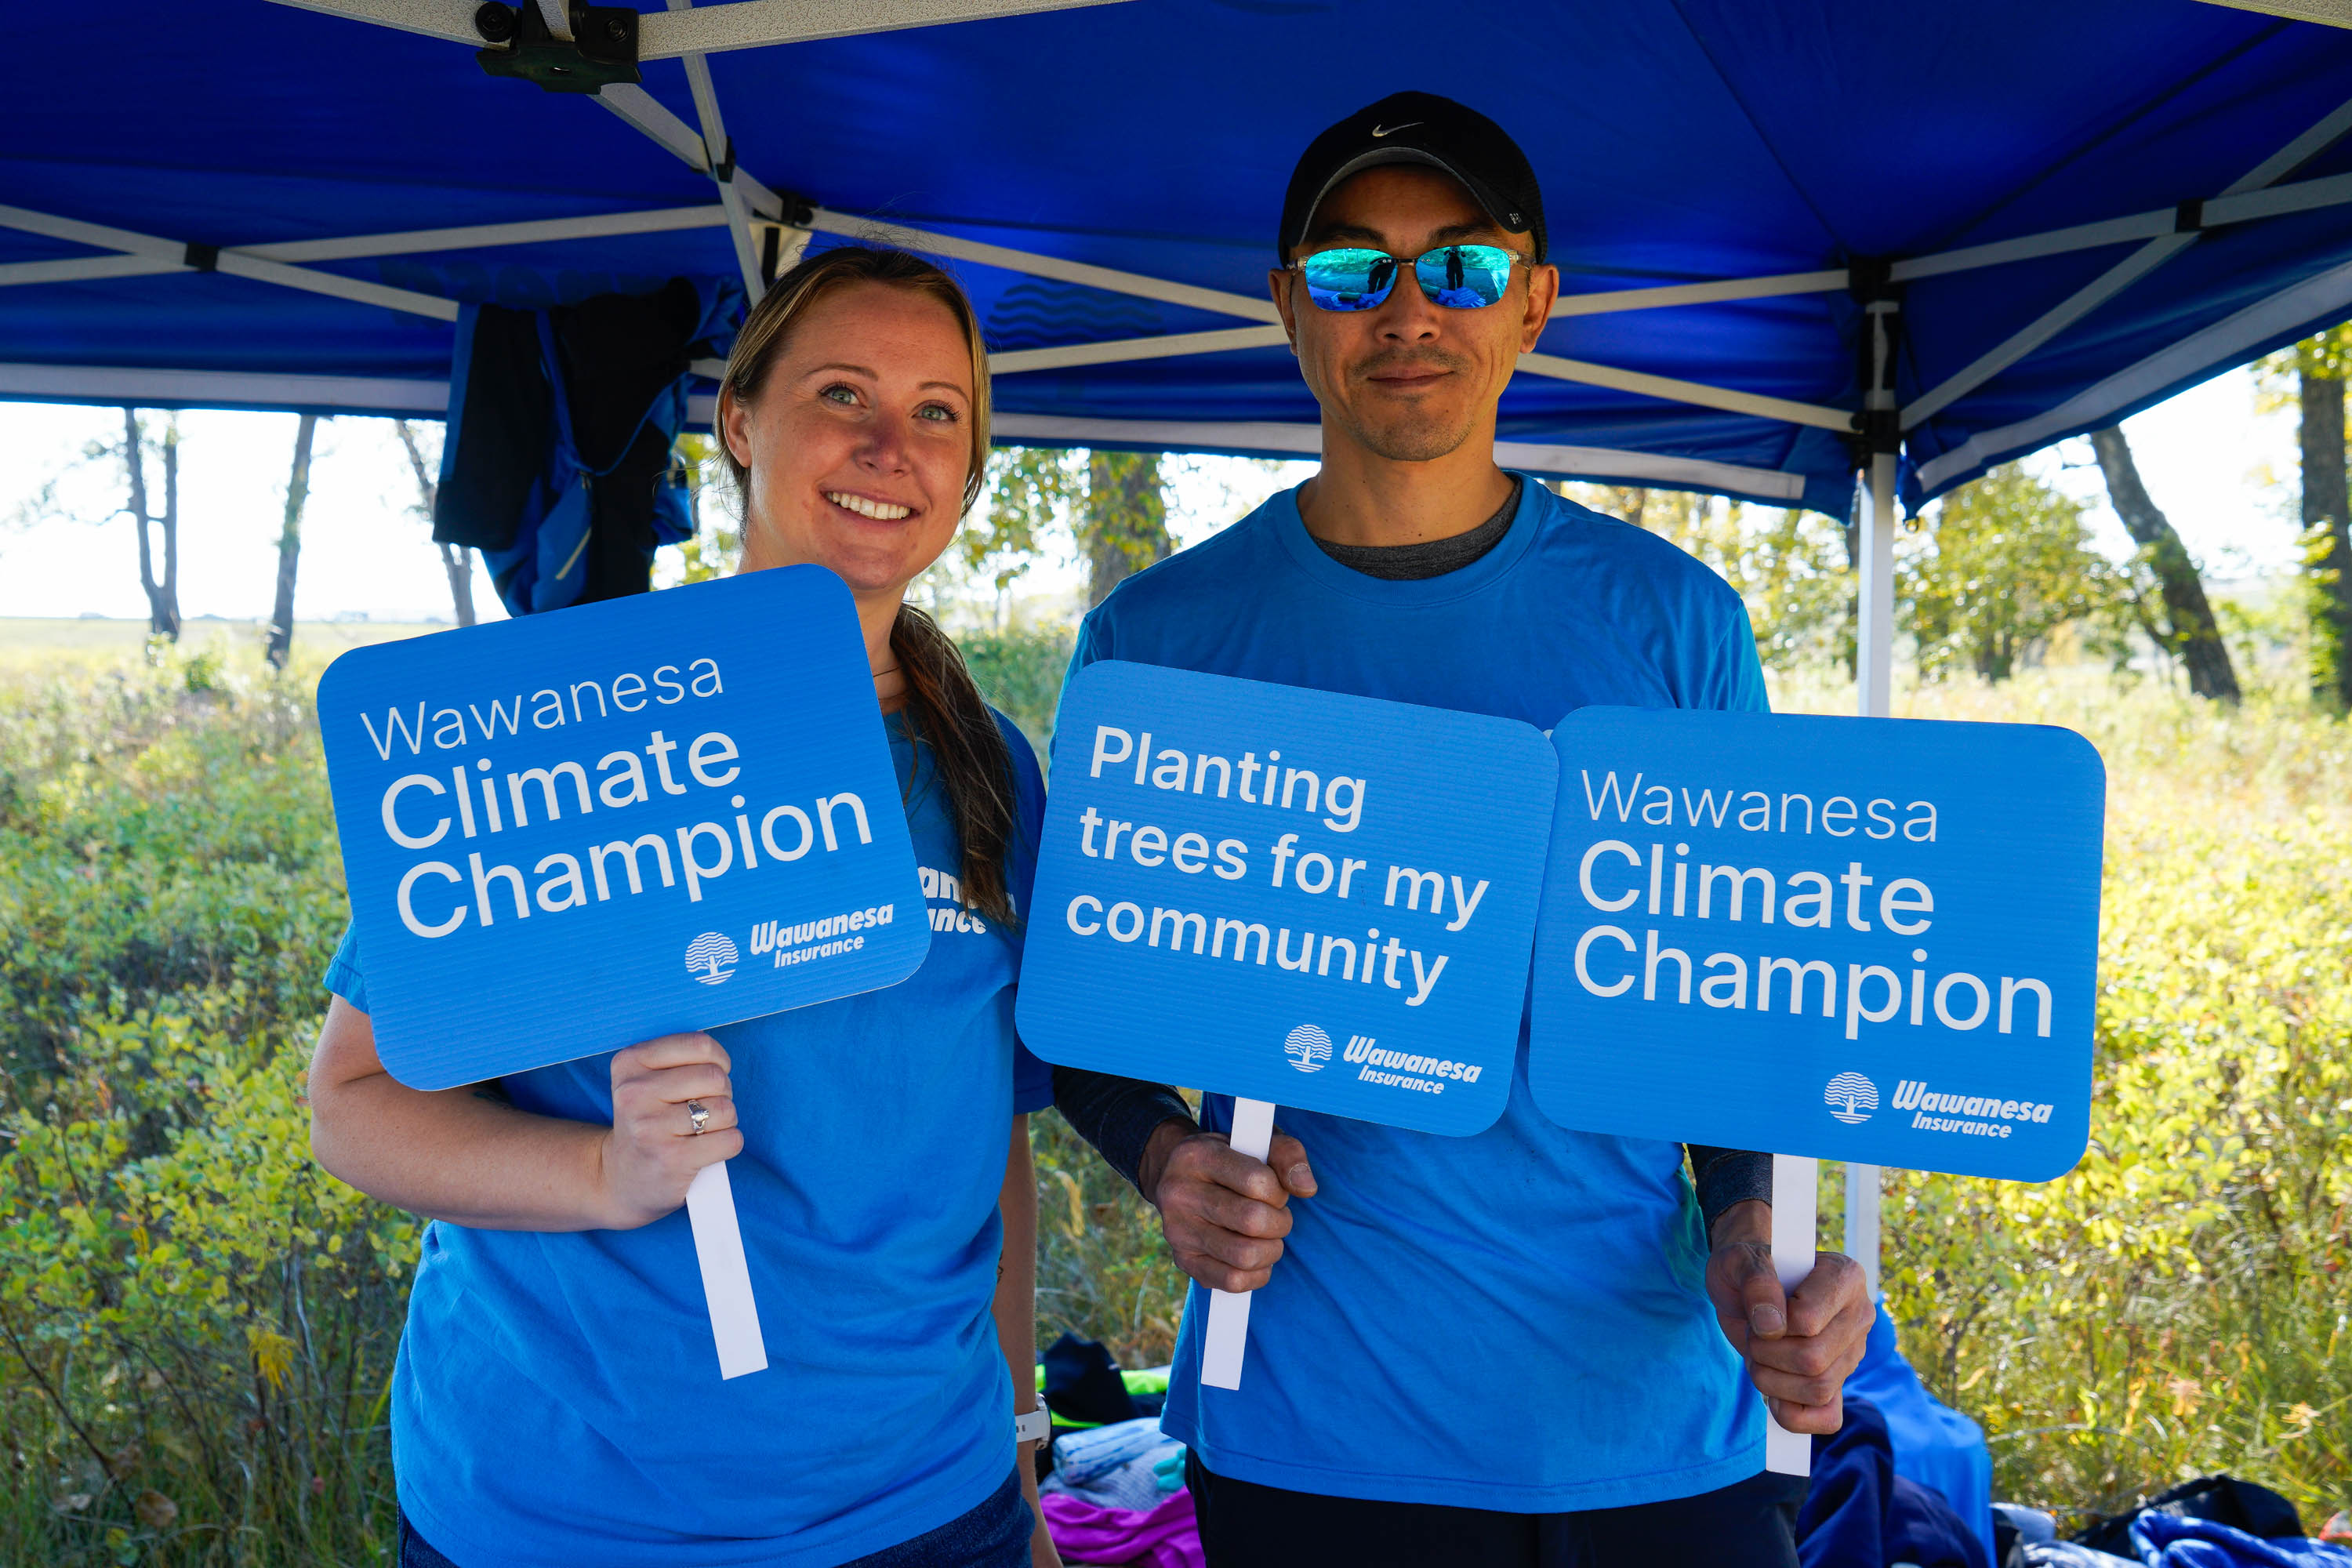 Two Wawanesa employees holding up Climate champion signs